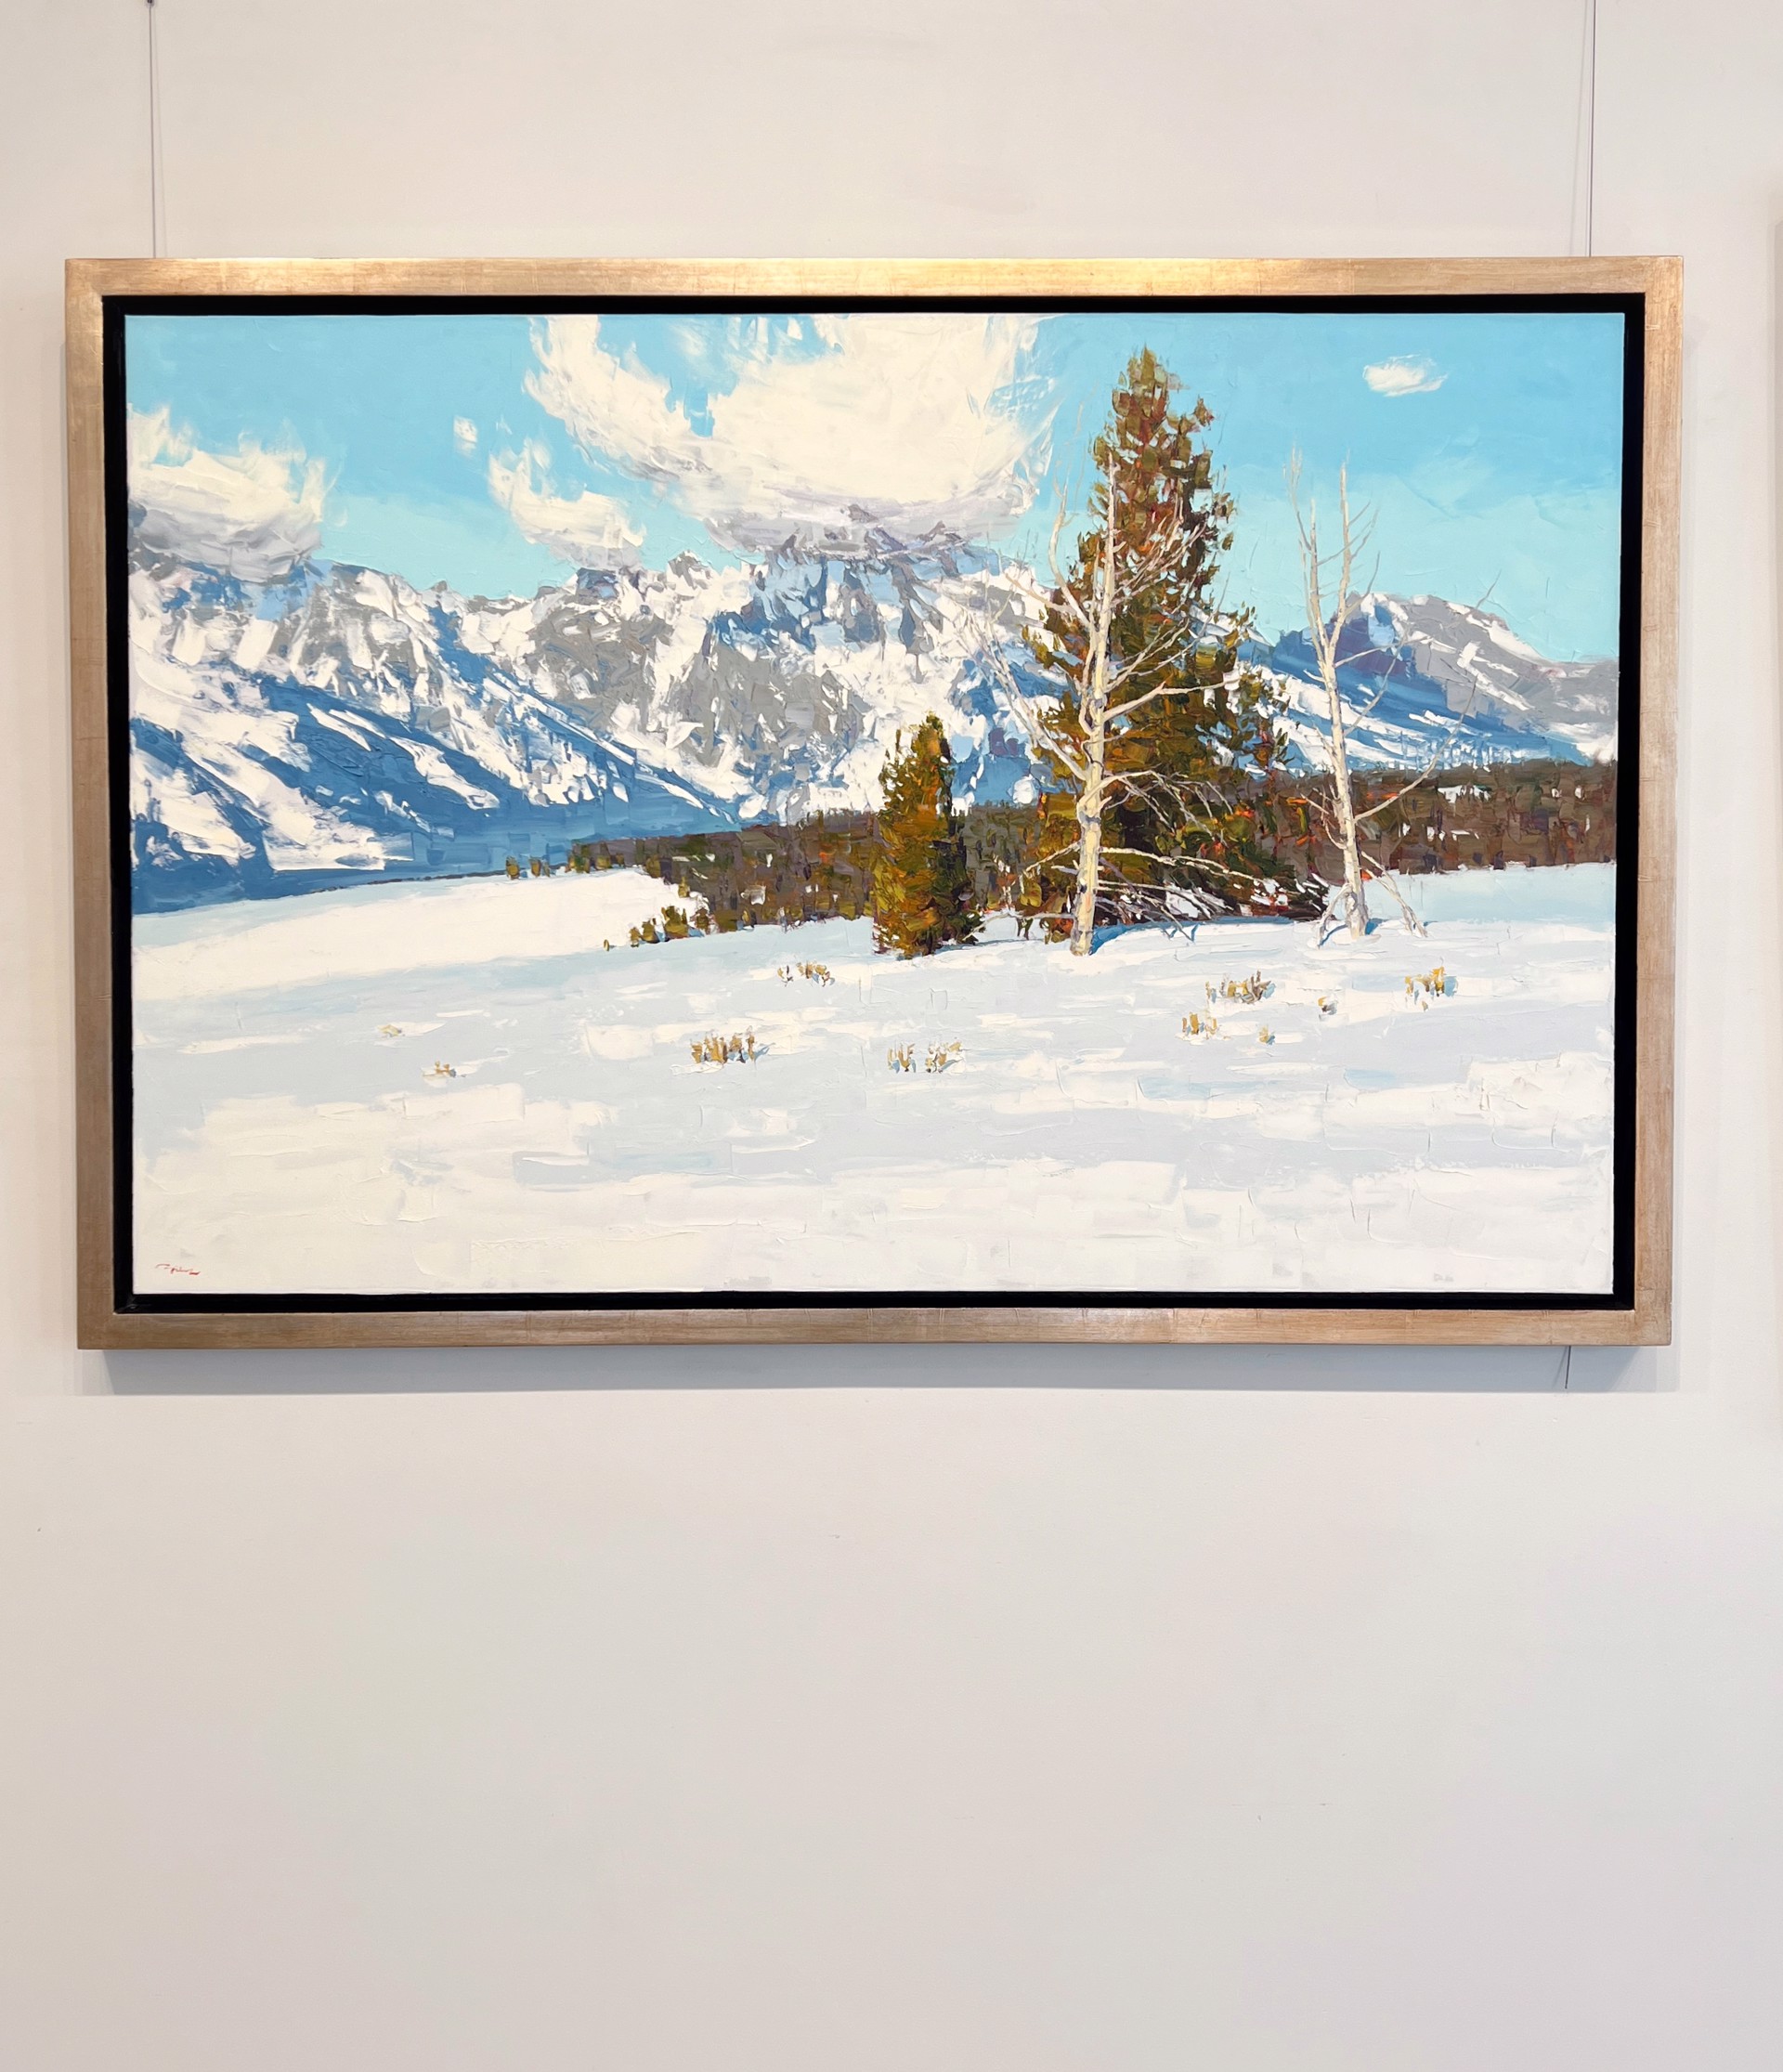 Original Oil Landscape Painting Featuring Snow Covered Mountains In Clouds And Pine Trees In The Foreground